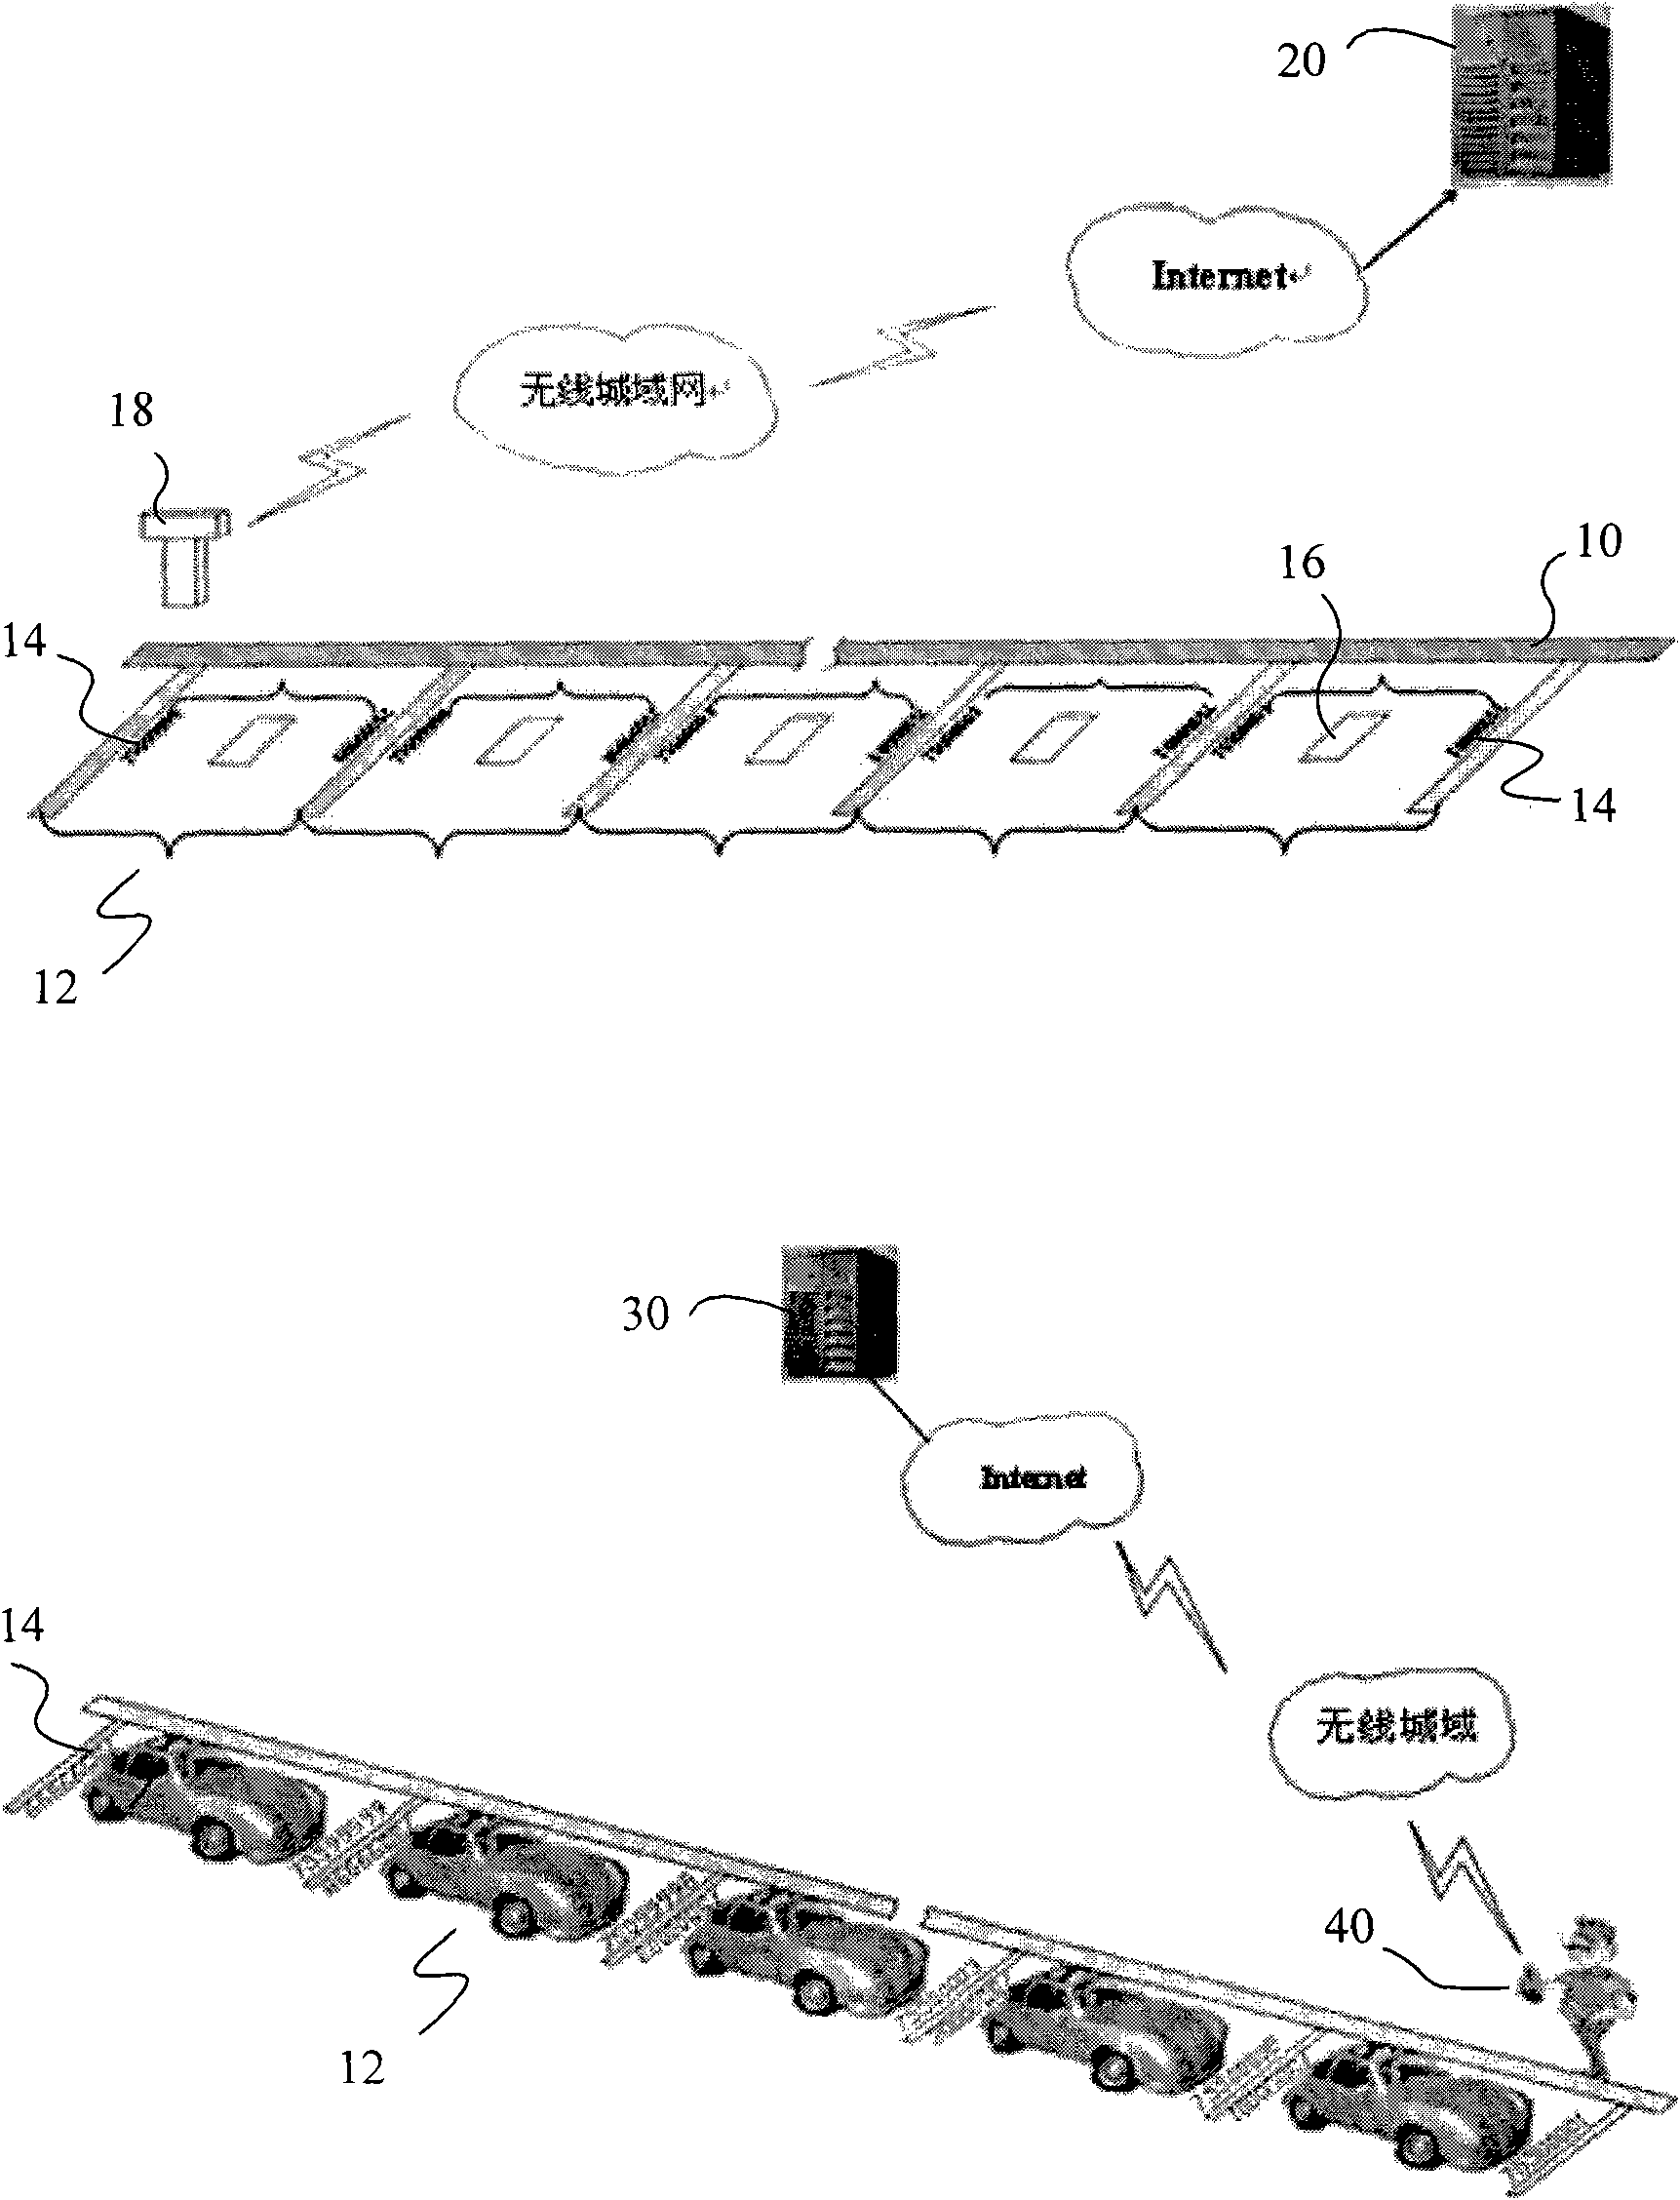 Public road parking charging method and implementation system thereof